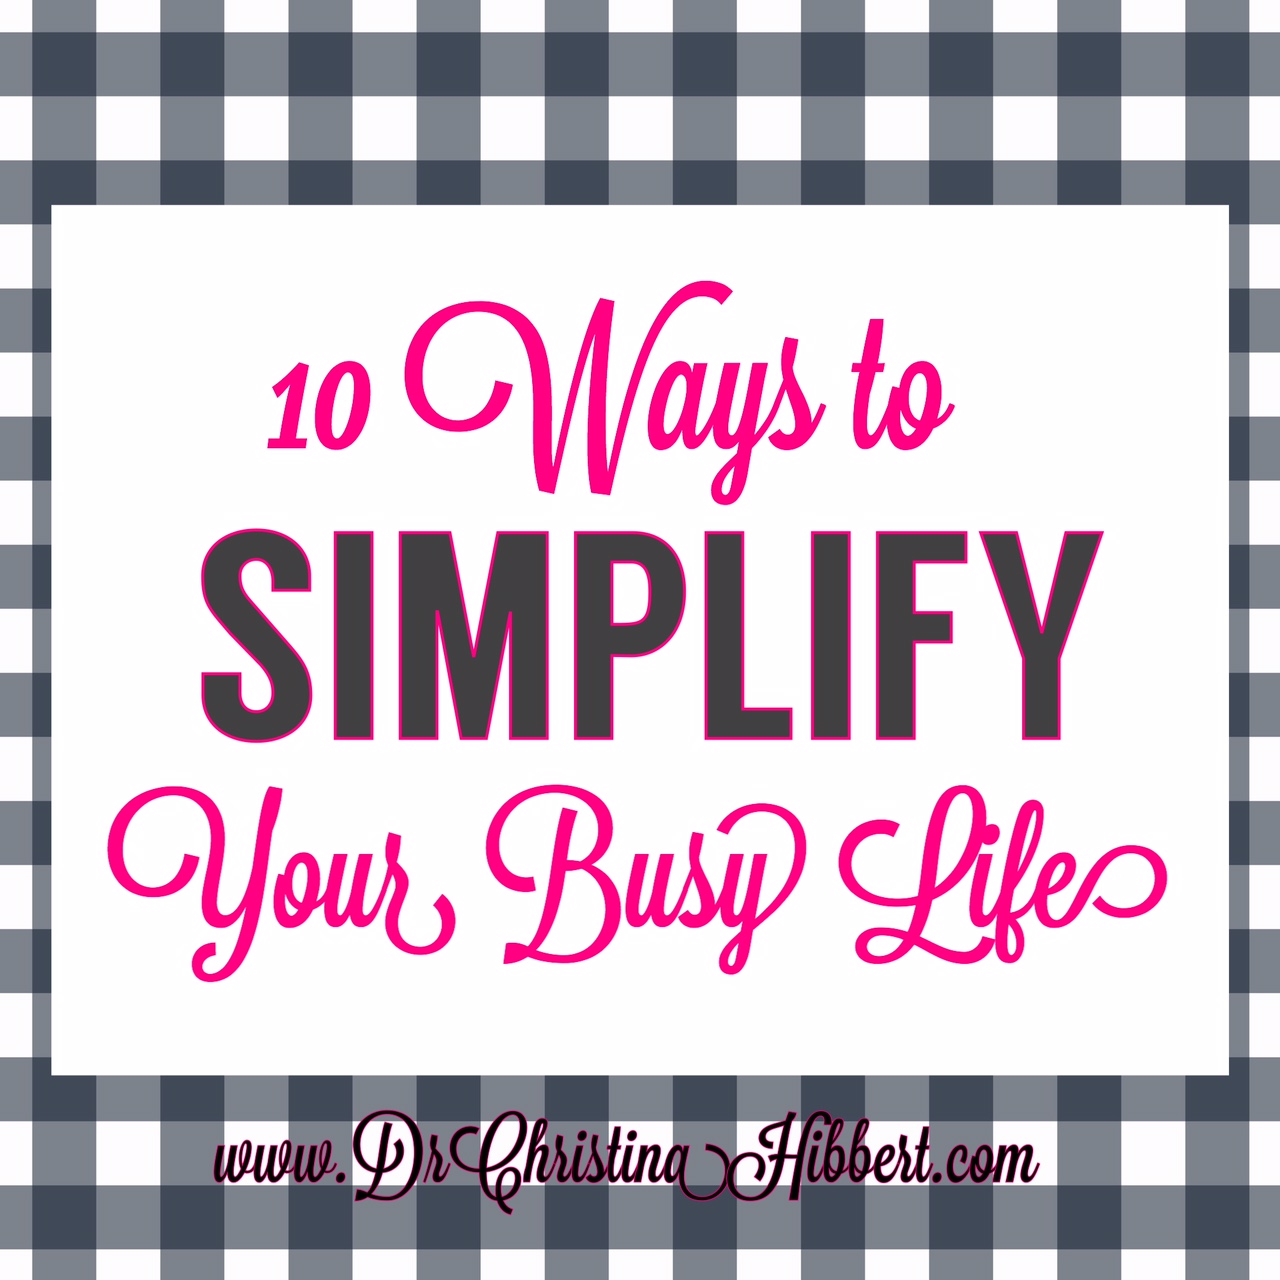 10 Ways to SIMPLIFY Your Busy Life